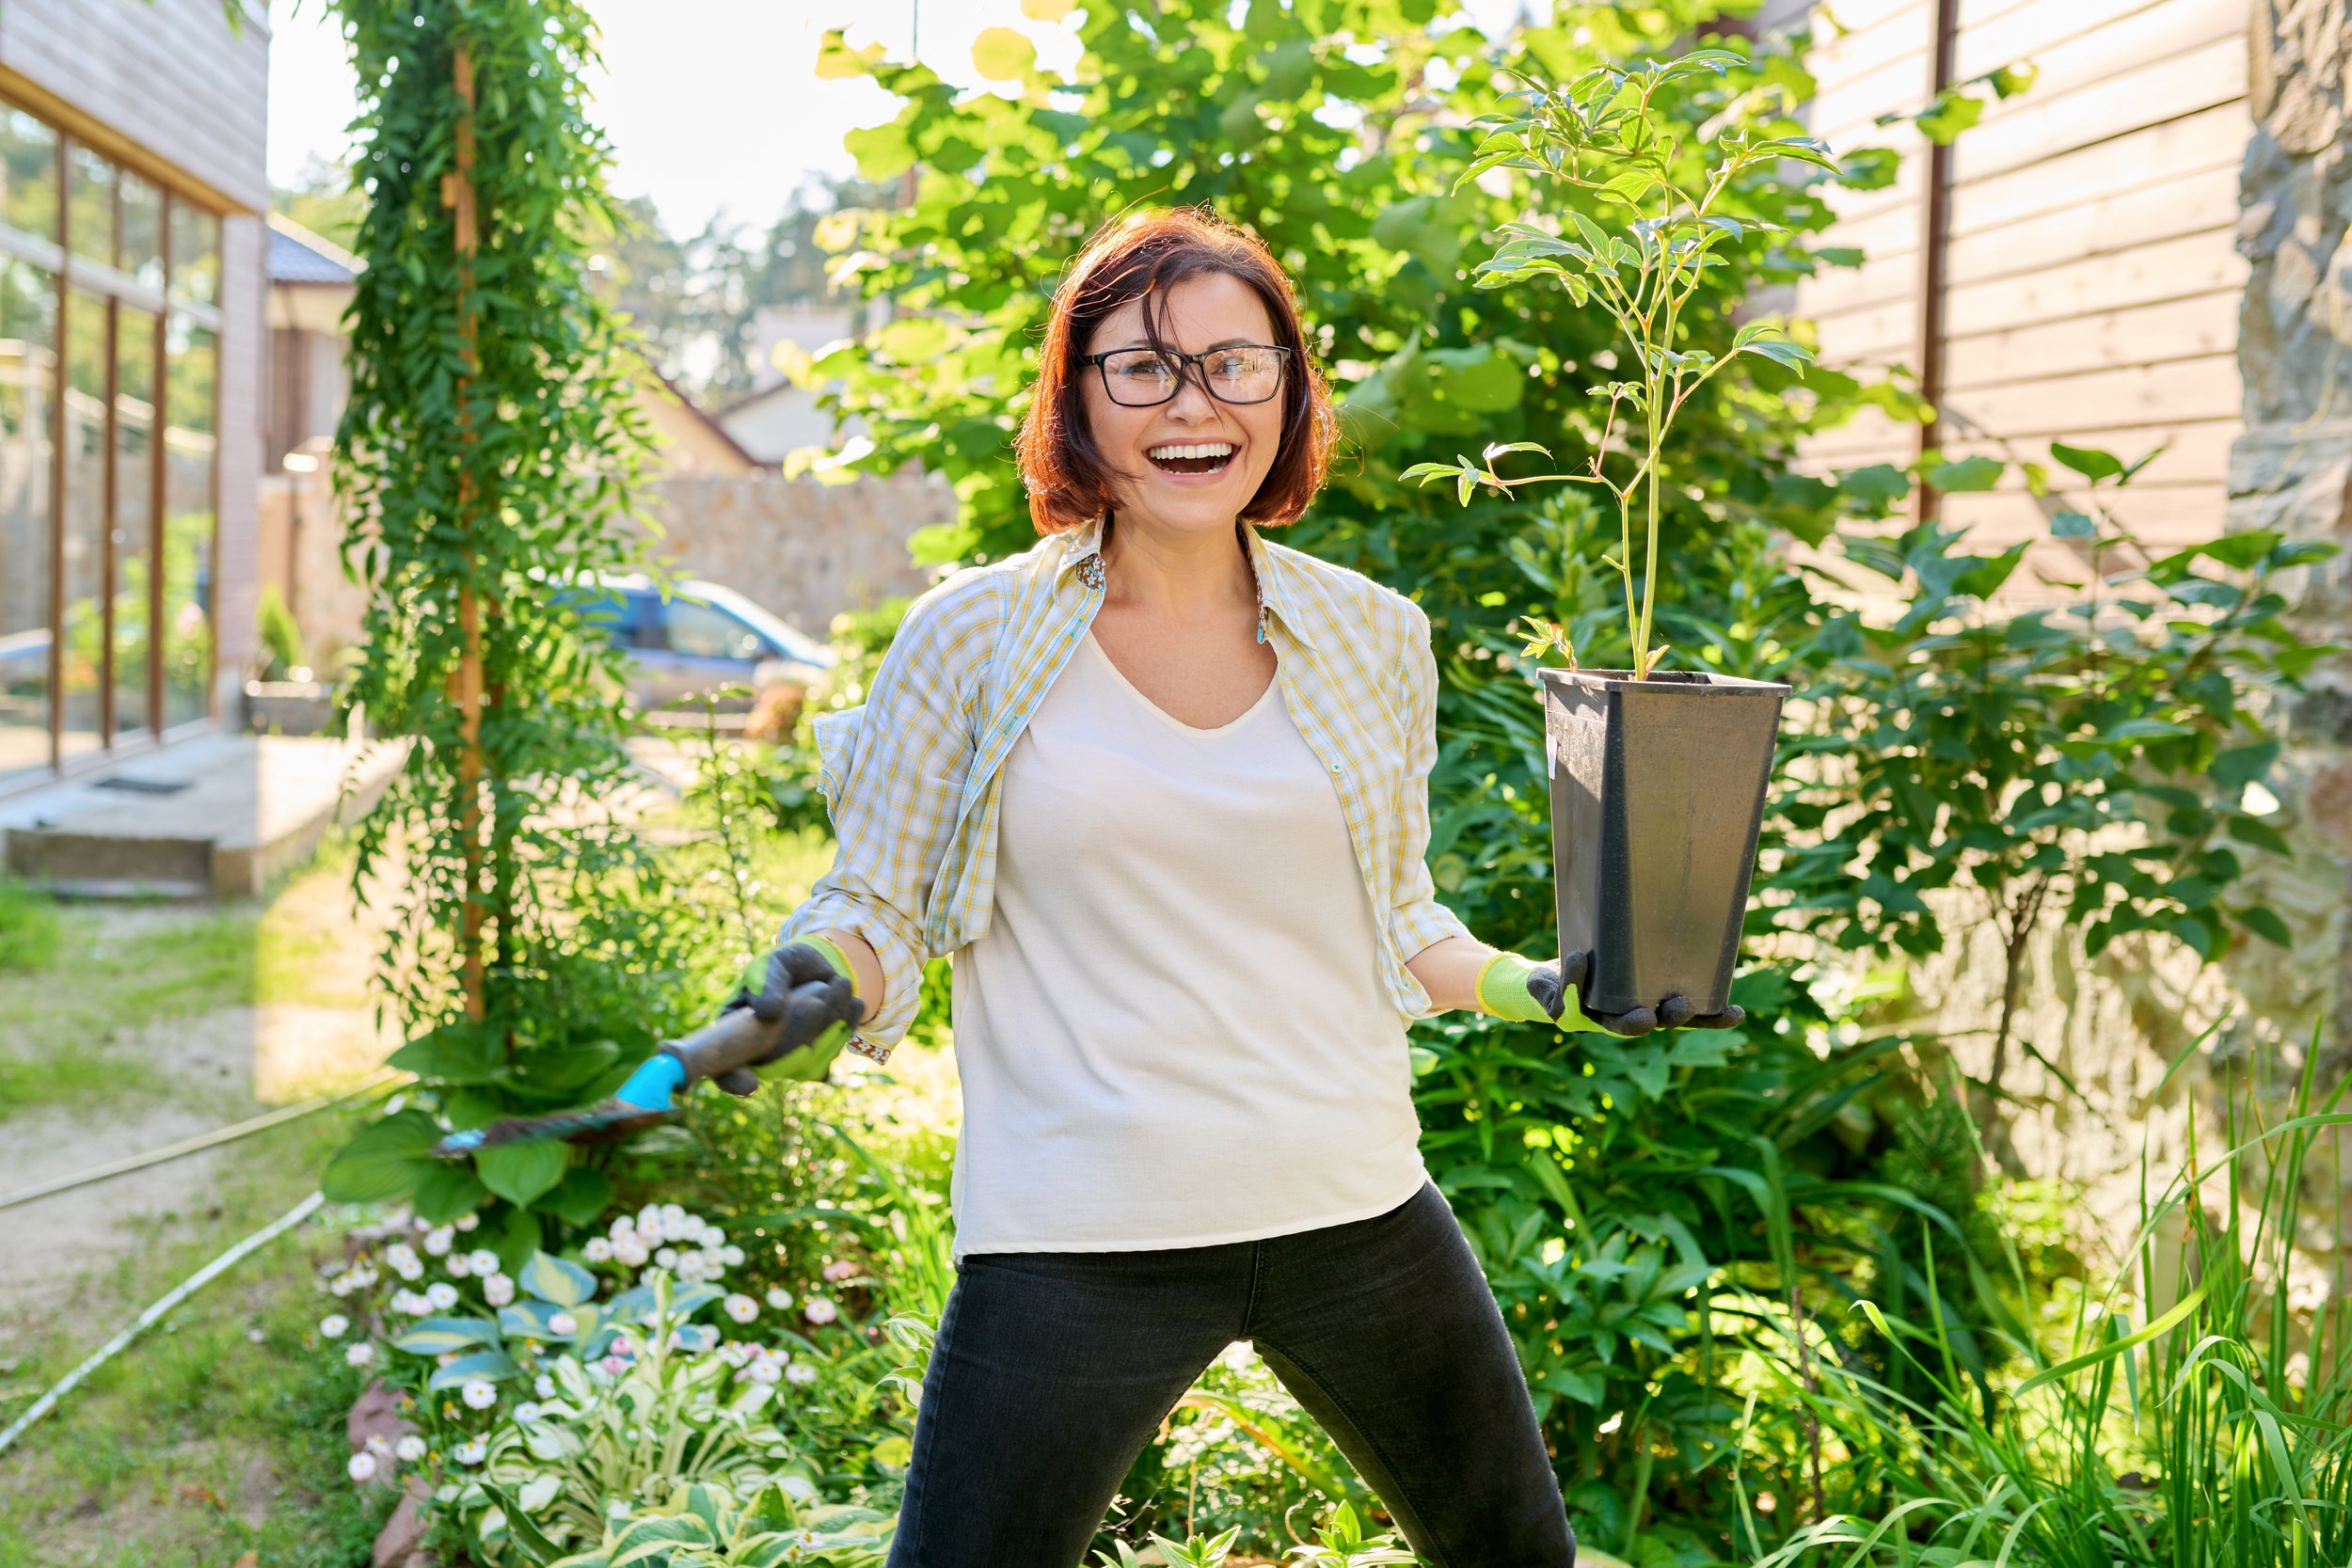 Garden Bliss: Smiling Woman with Wool and Plant in Her Garden - Garden City Dental Care